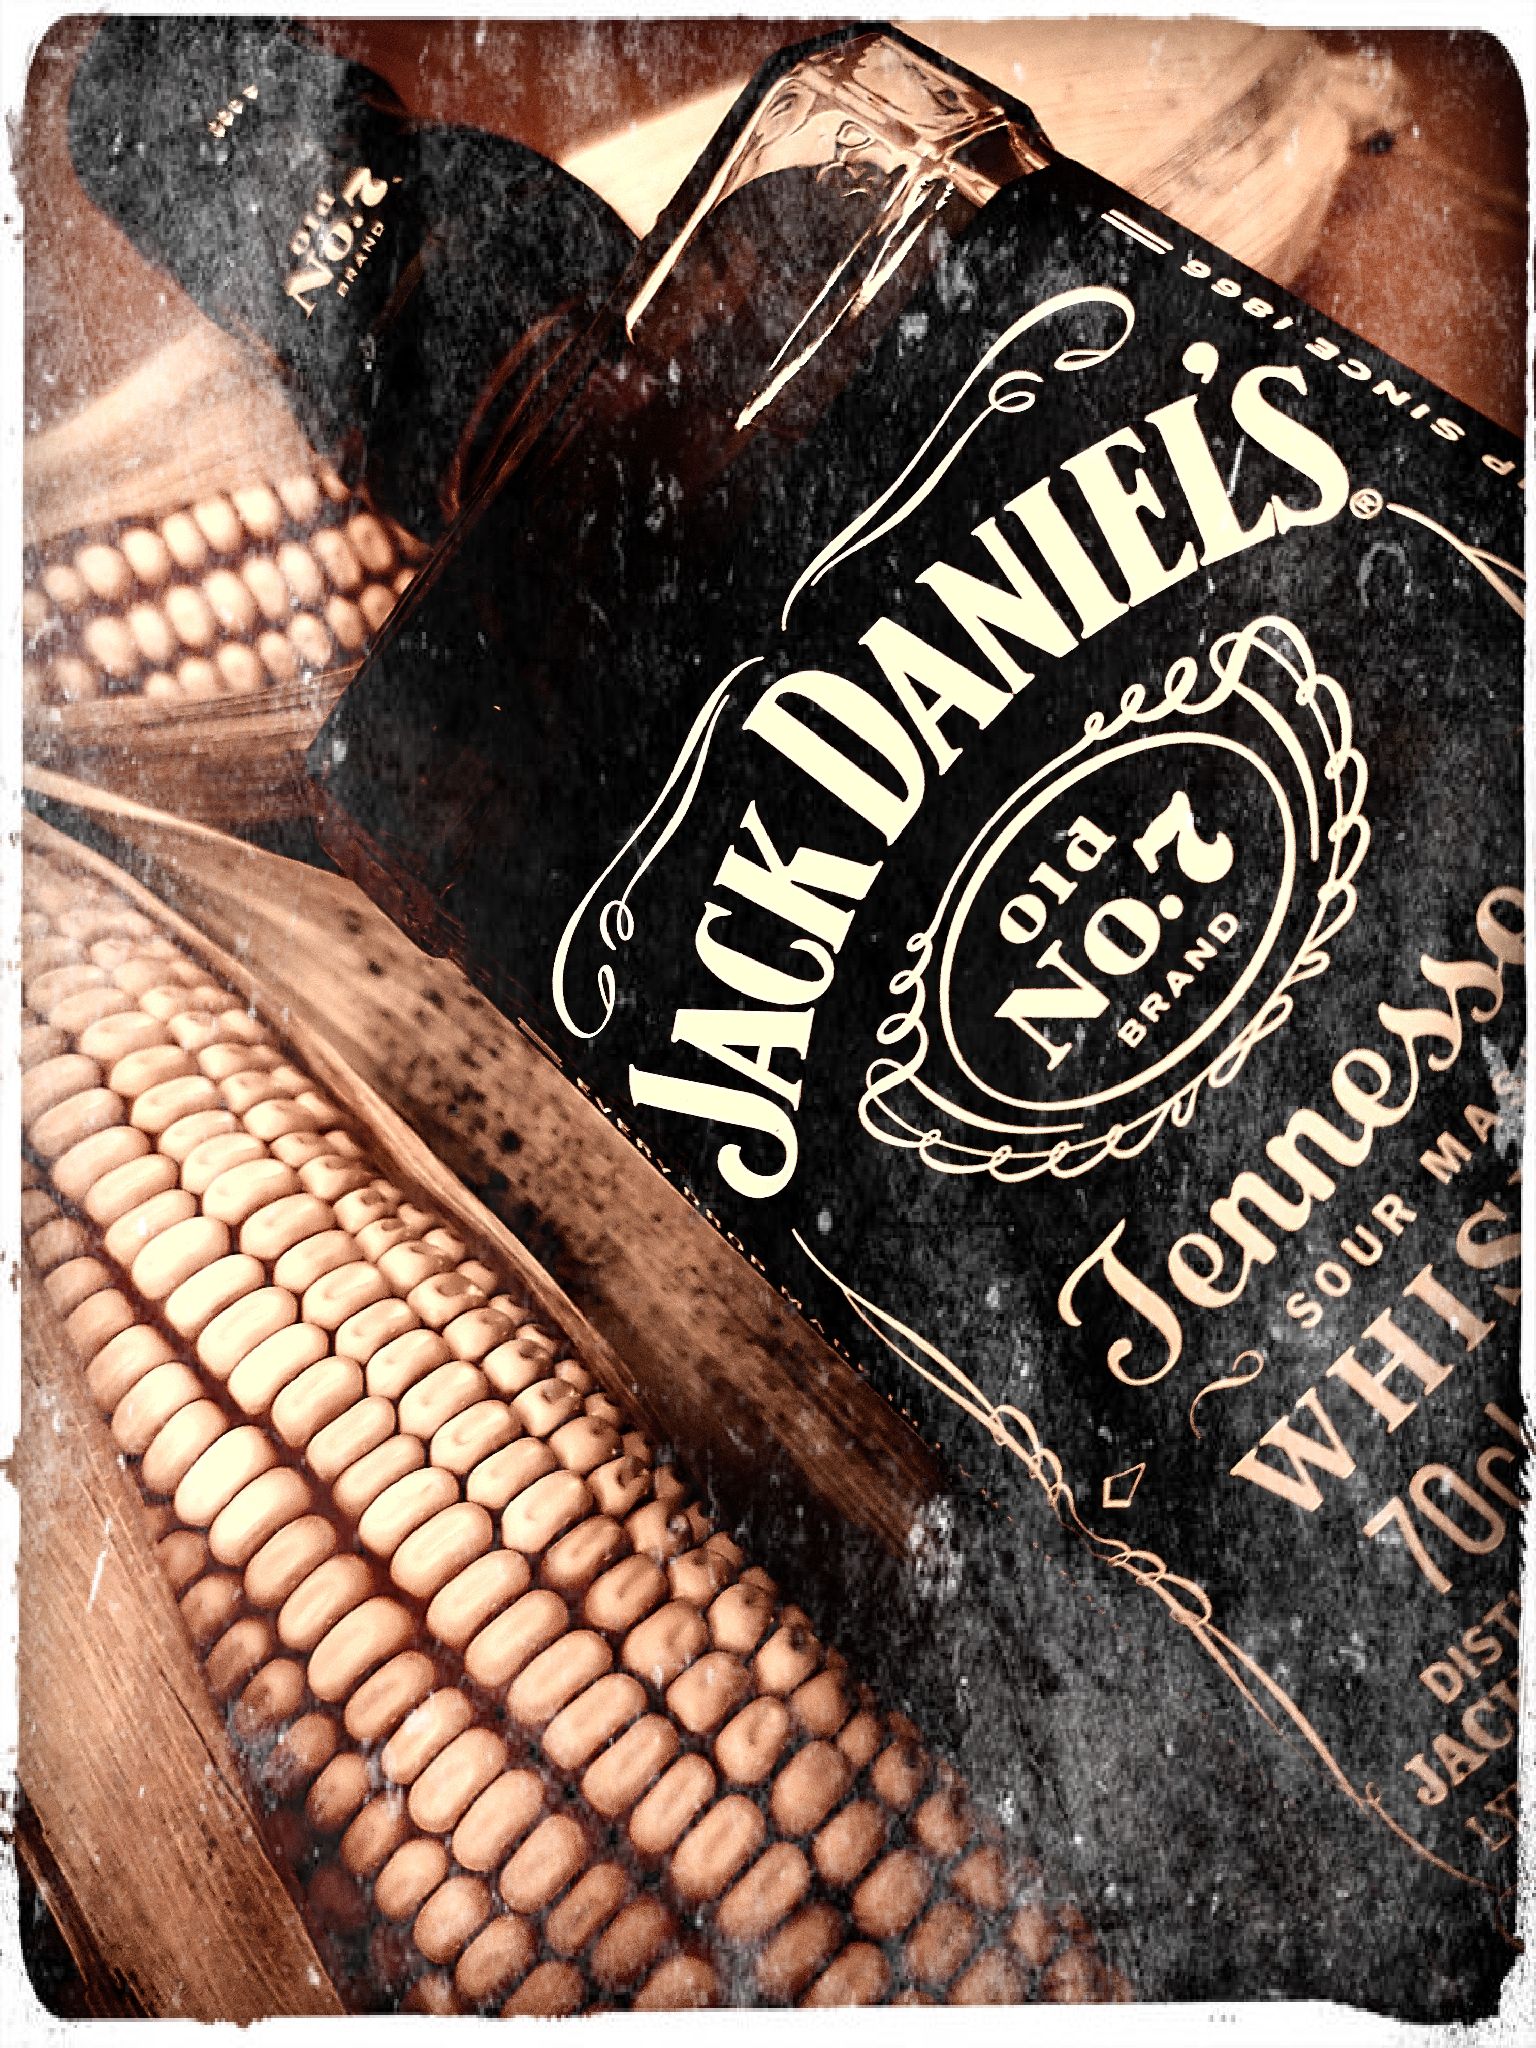 Jack Daniel's Old No. 7 Tennesse Whiskey